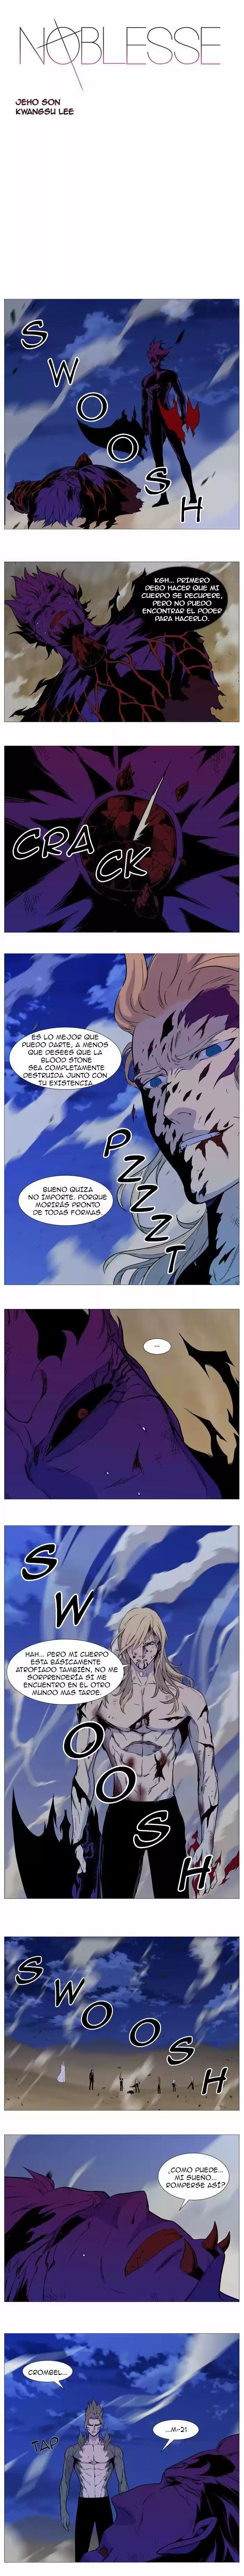 Noblesse: Chapter 541 - Page 1